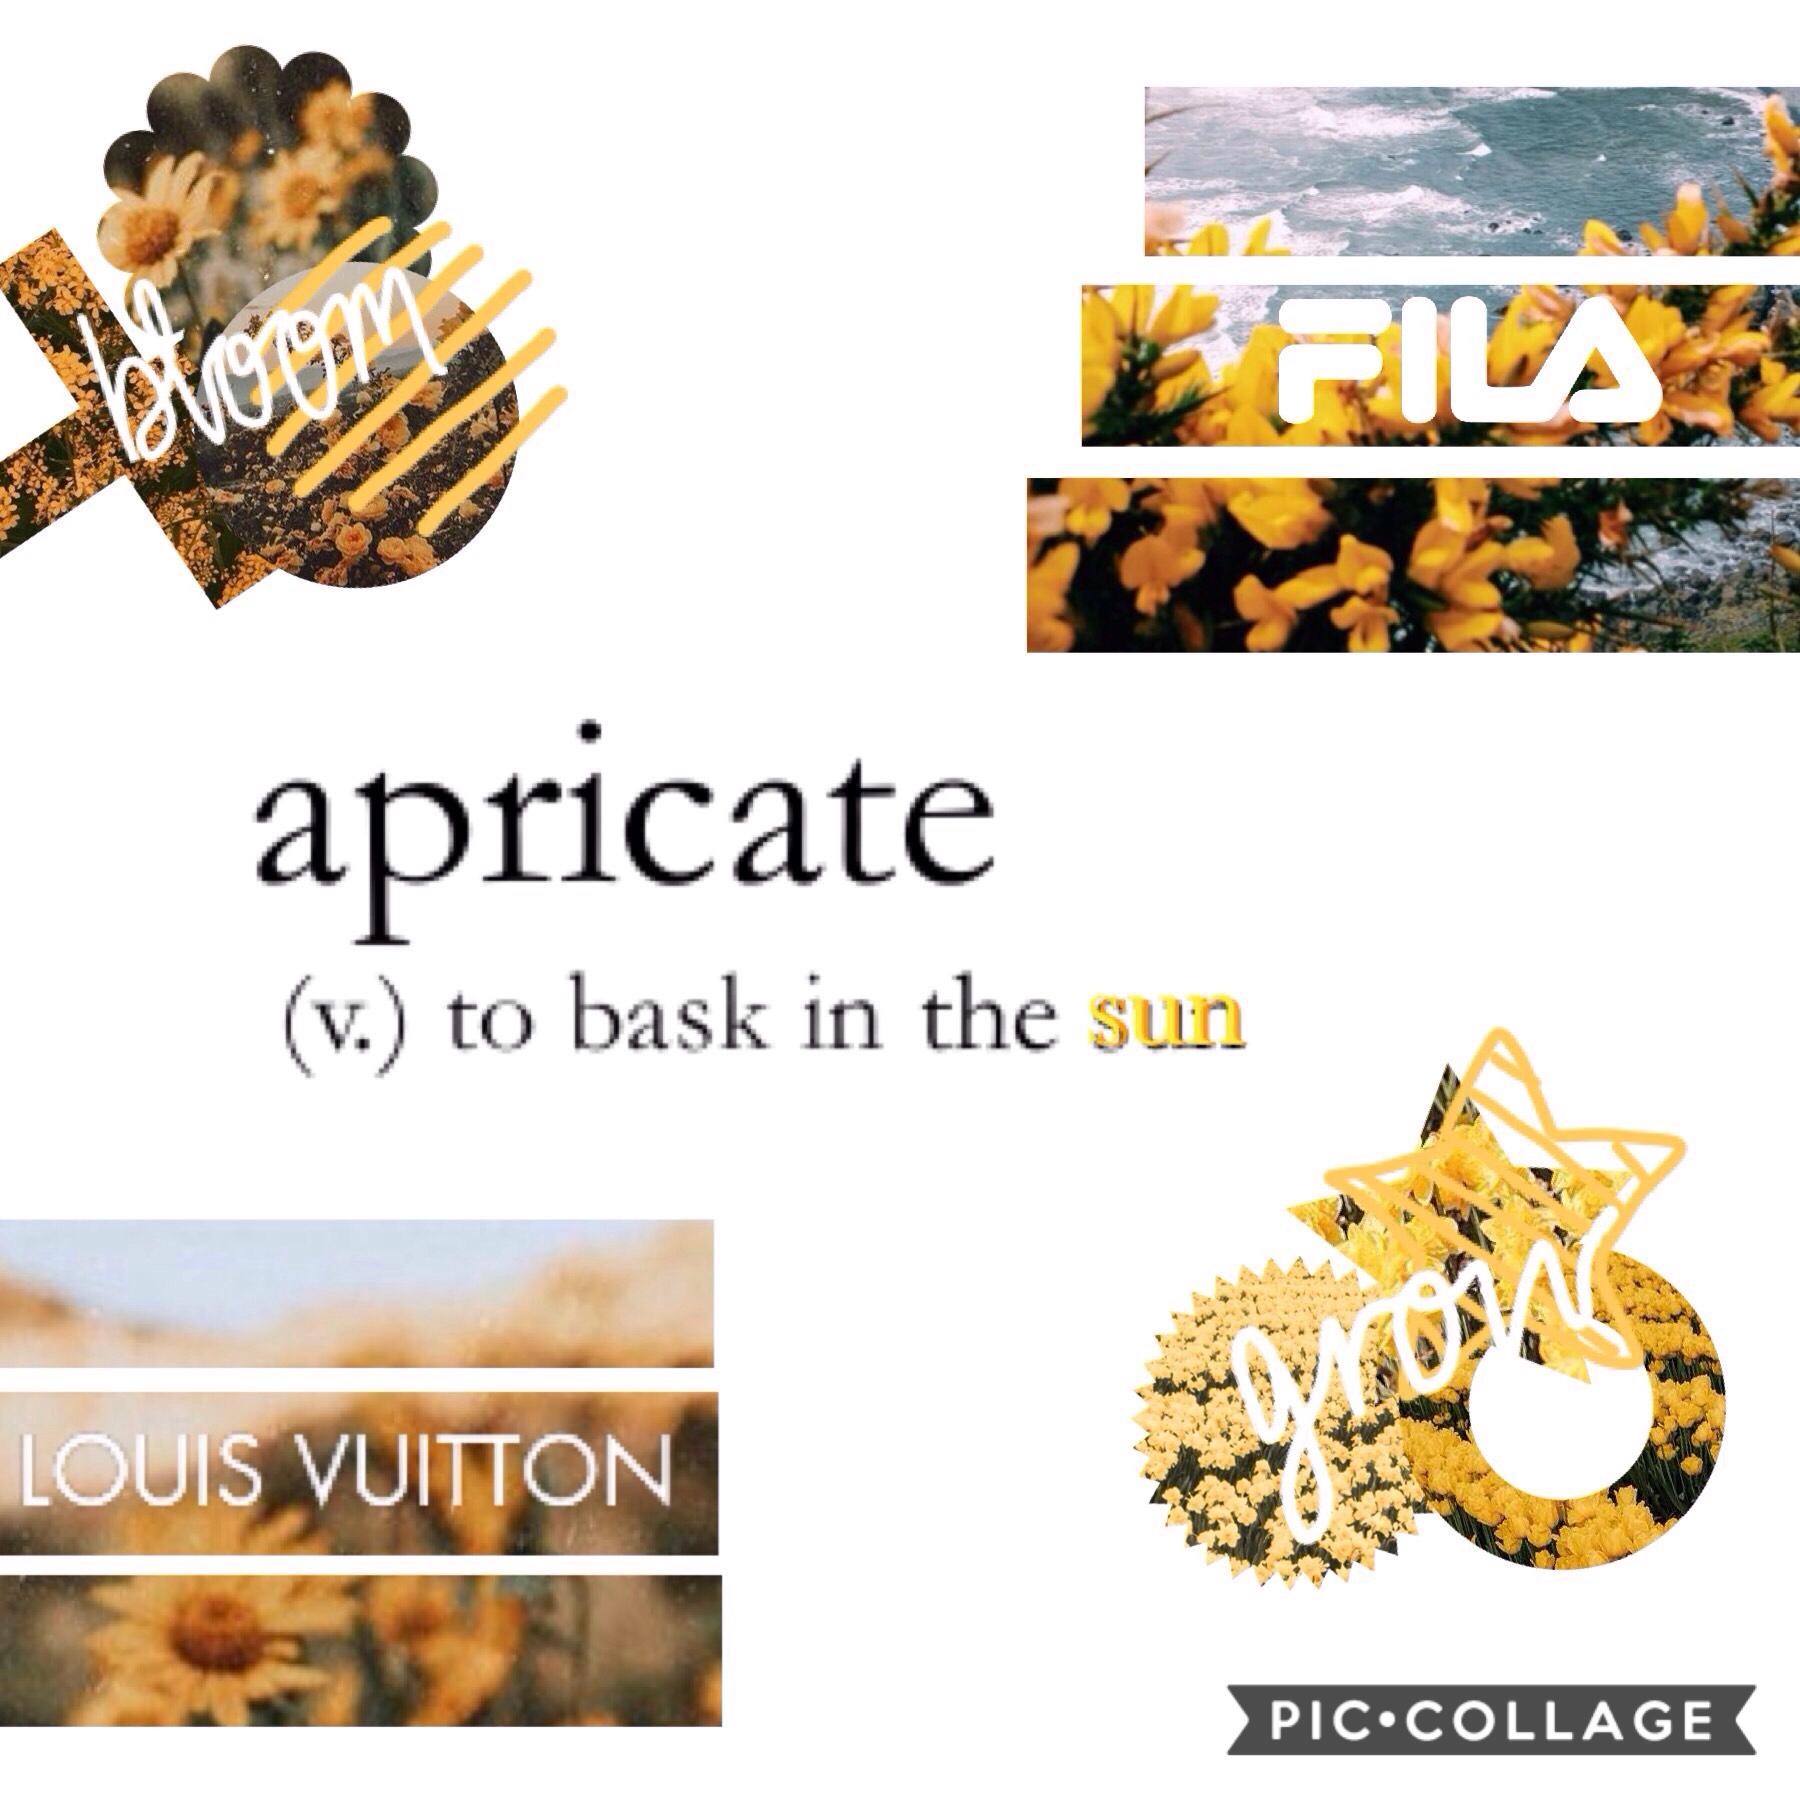 { apricate } - "to bask in the sun" ☀️🌻⛅️ { 25/08 }
today is a nice sunny day where I am, to match the theme of this bright, happy collage😊✨ 
even if you don't have a sunny day today, think happy and on the bright side! my goal: to stay positive and be ki